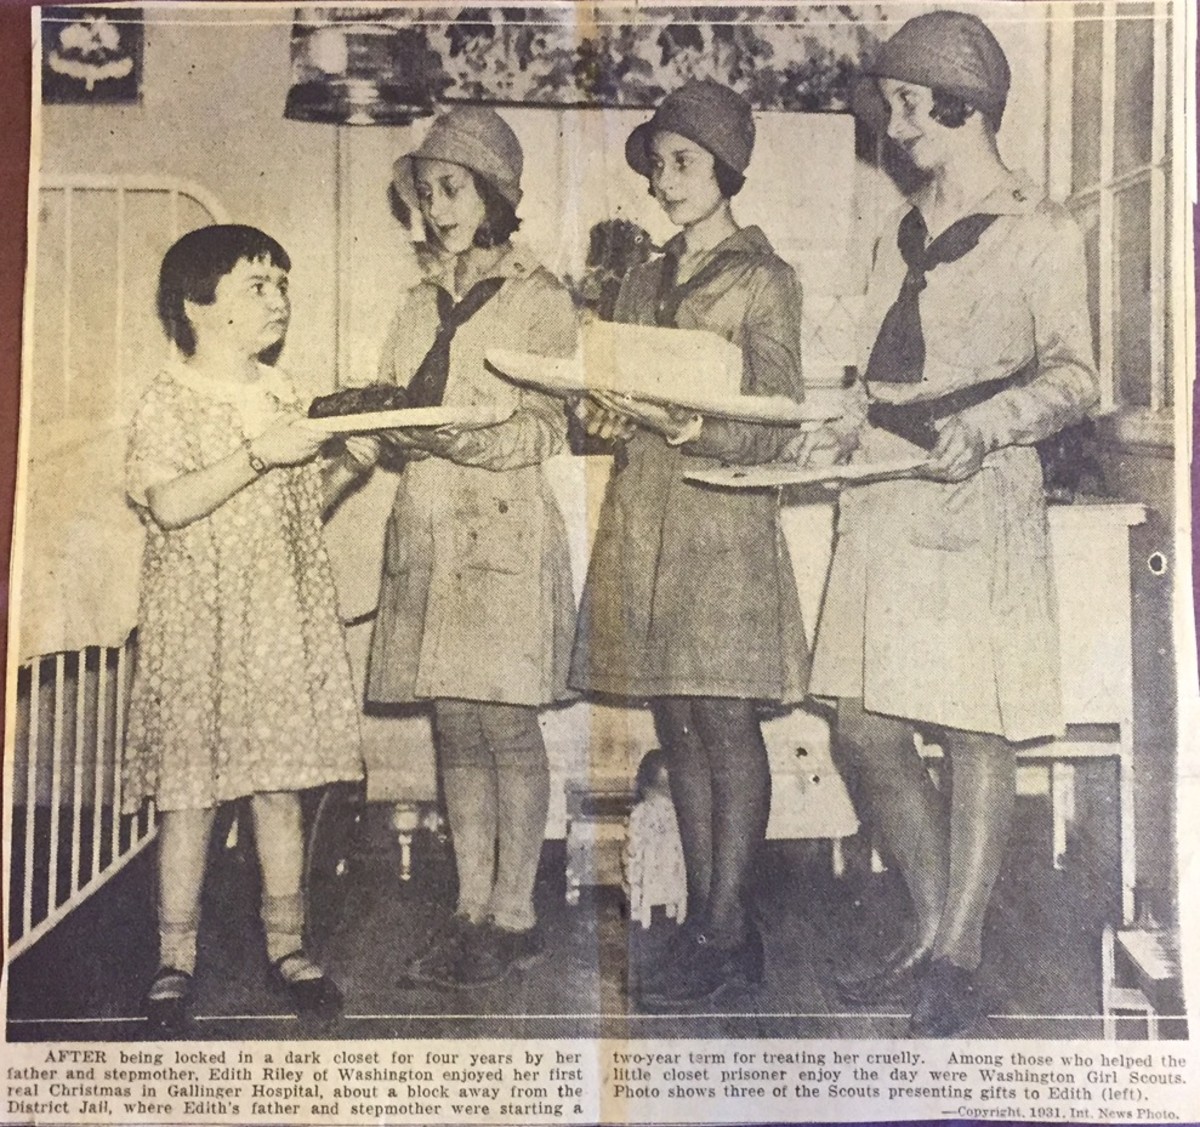 "Edith Riley of Washington enjoyed her first real Christmas in Gallinger Hospital..."